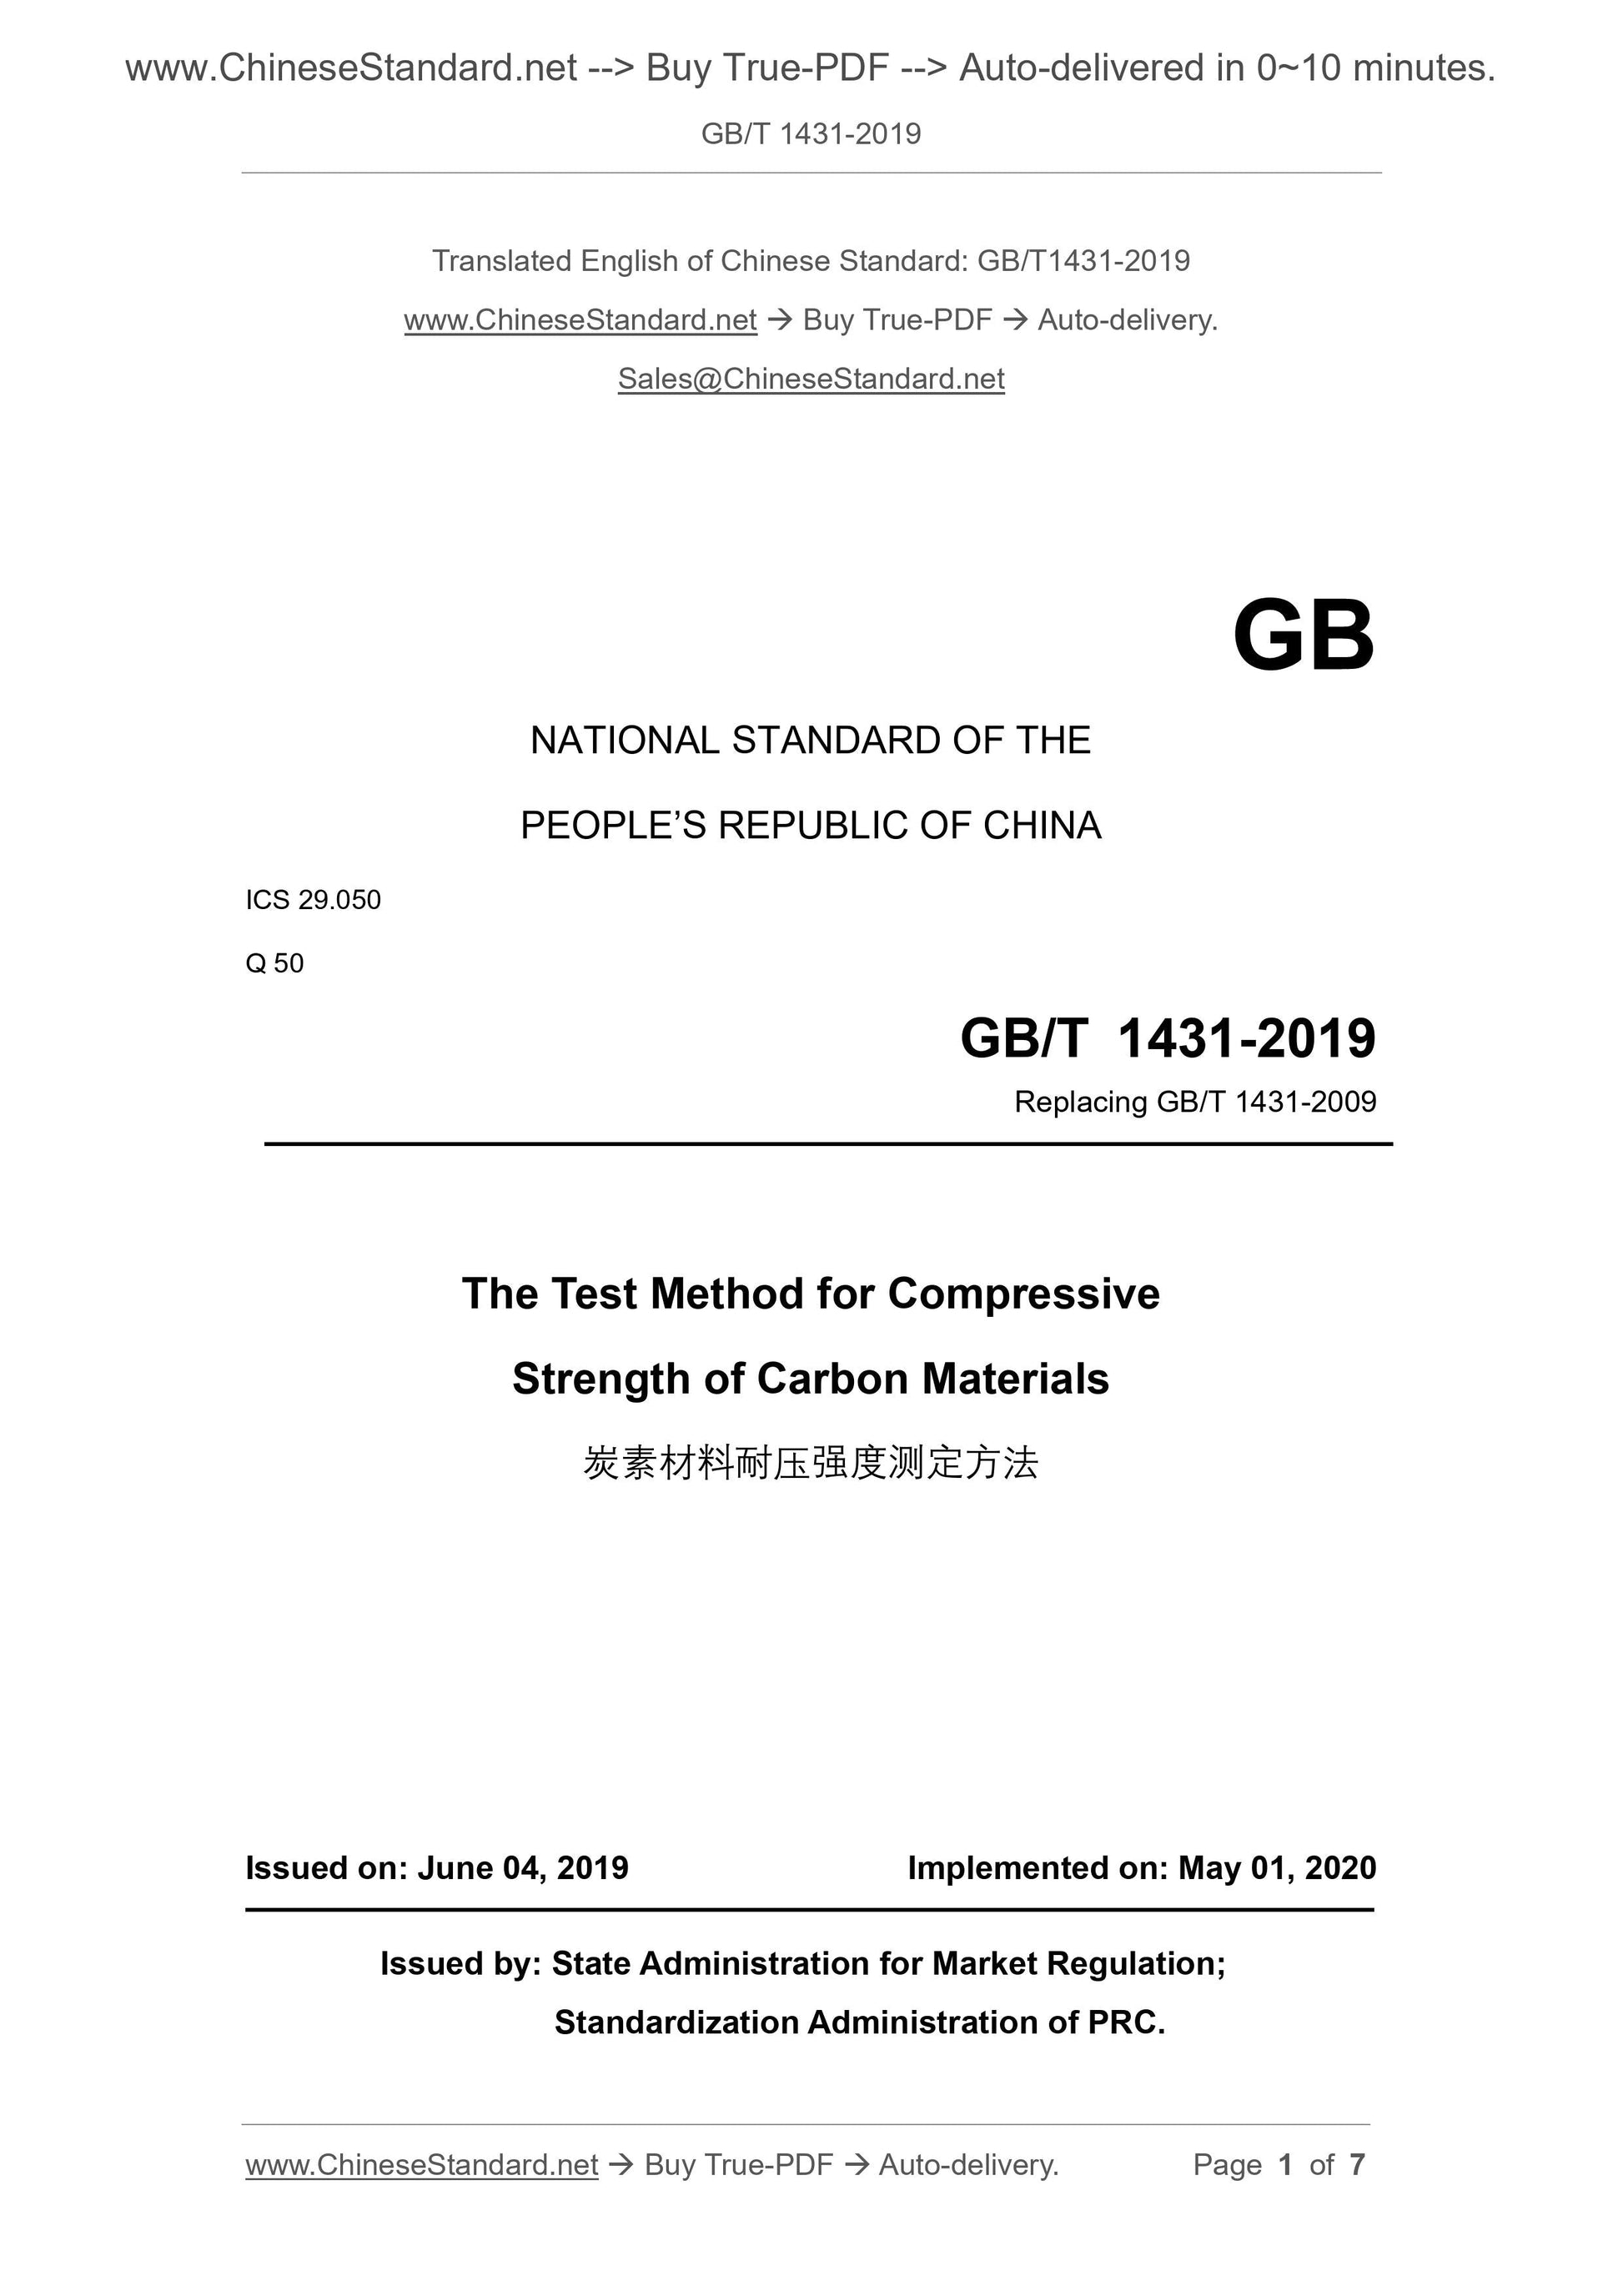 GB/T 1431-2019 Page 1